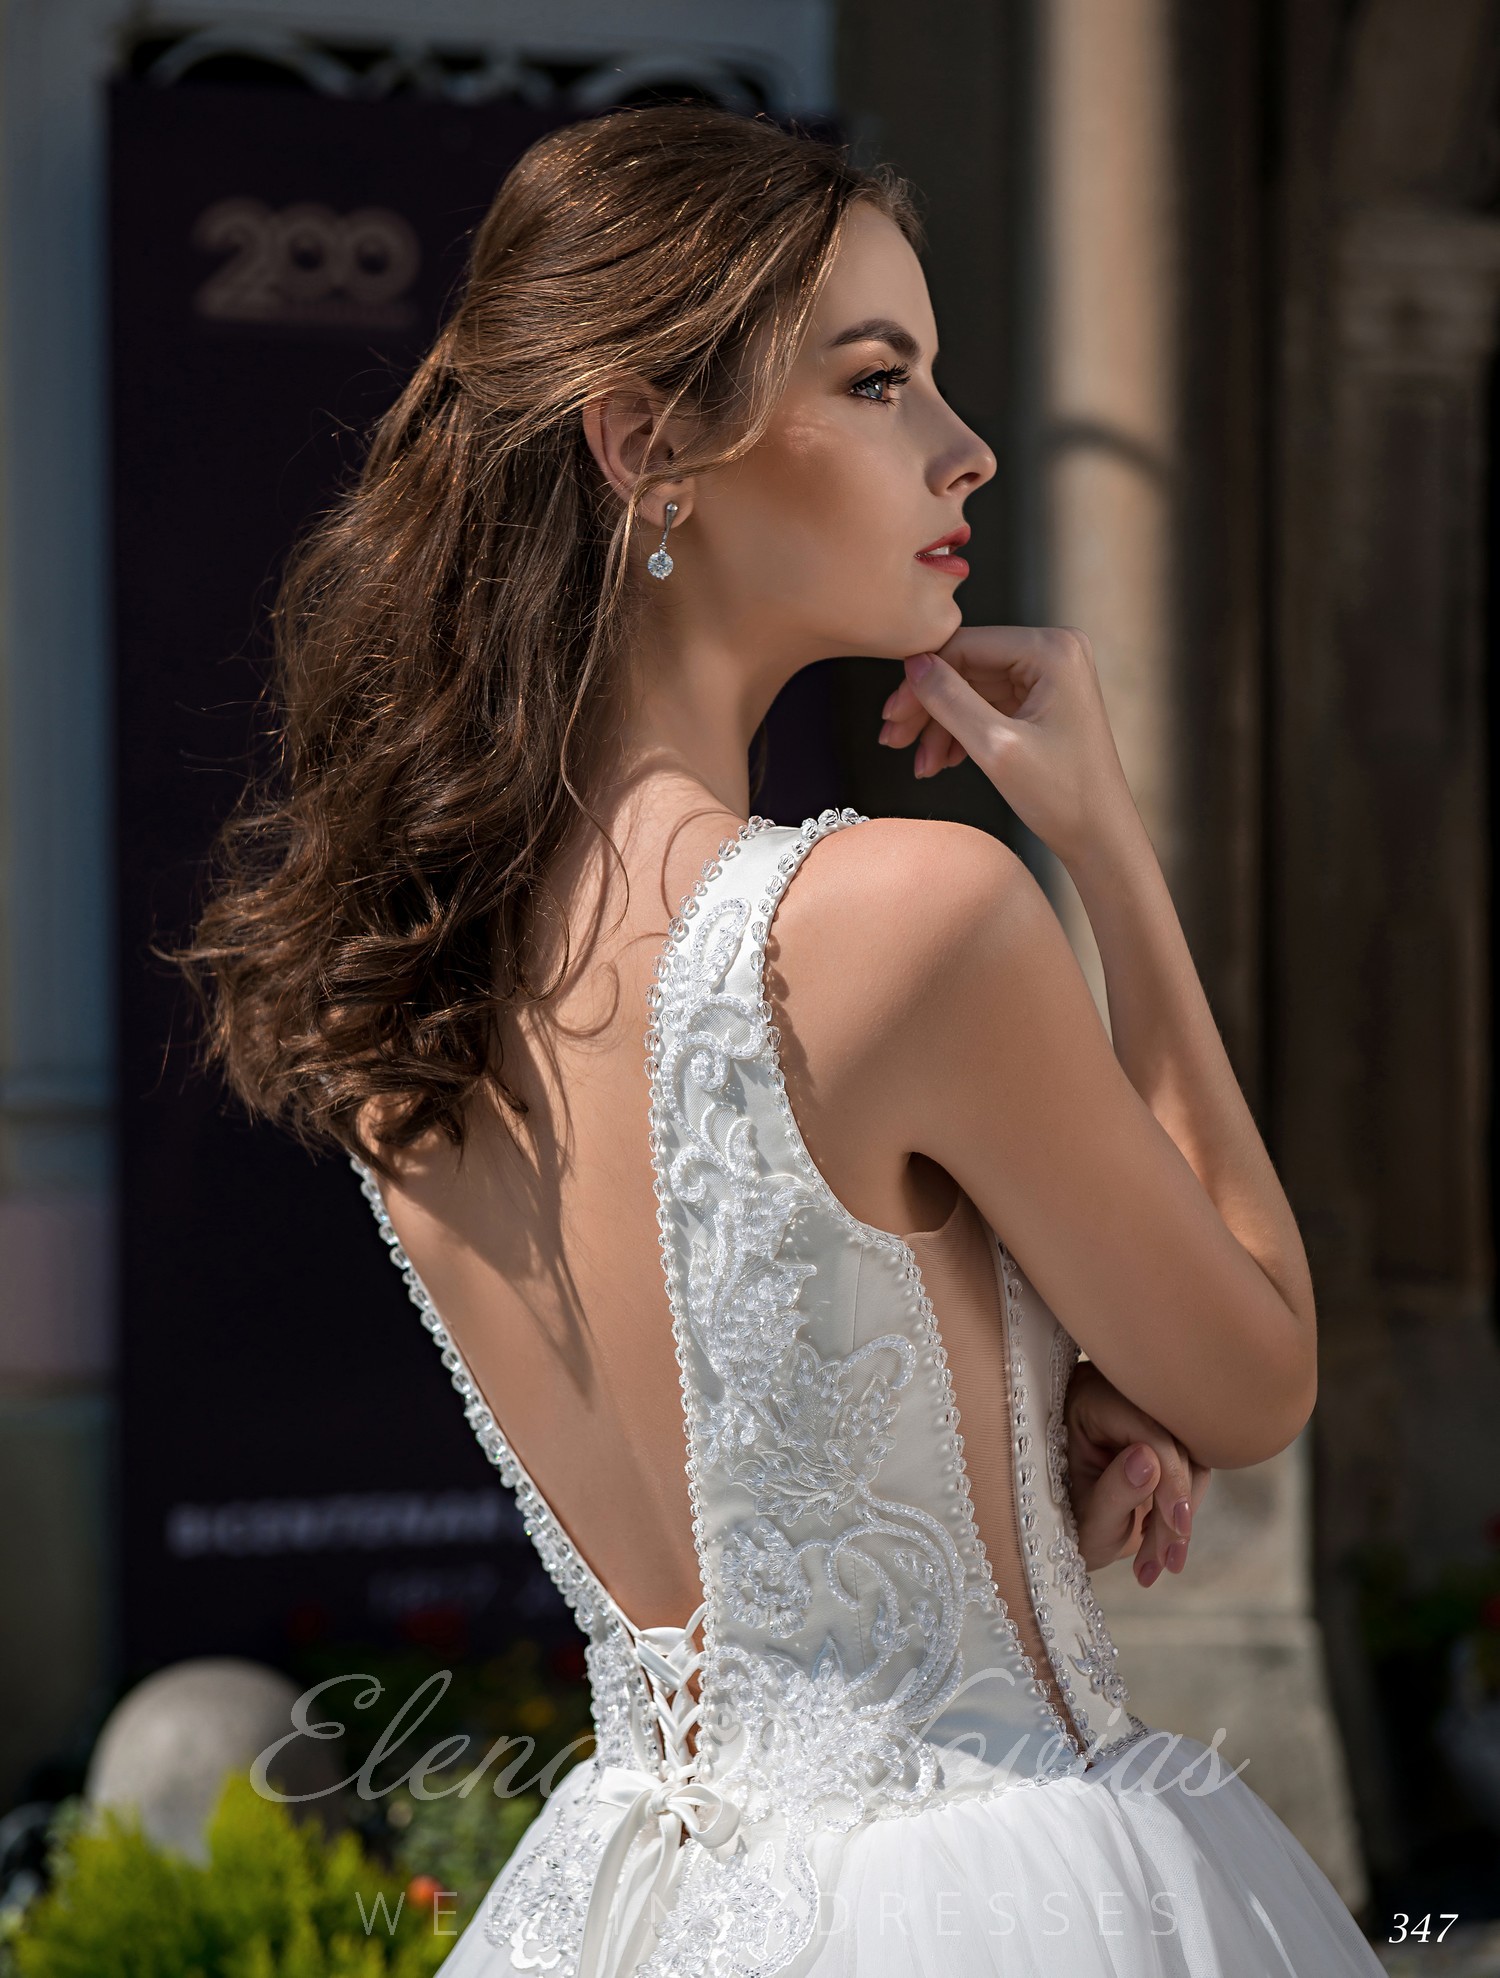 Wedding dress with open back and deep neckline